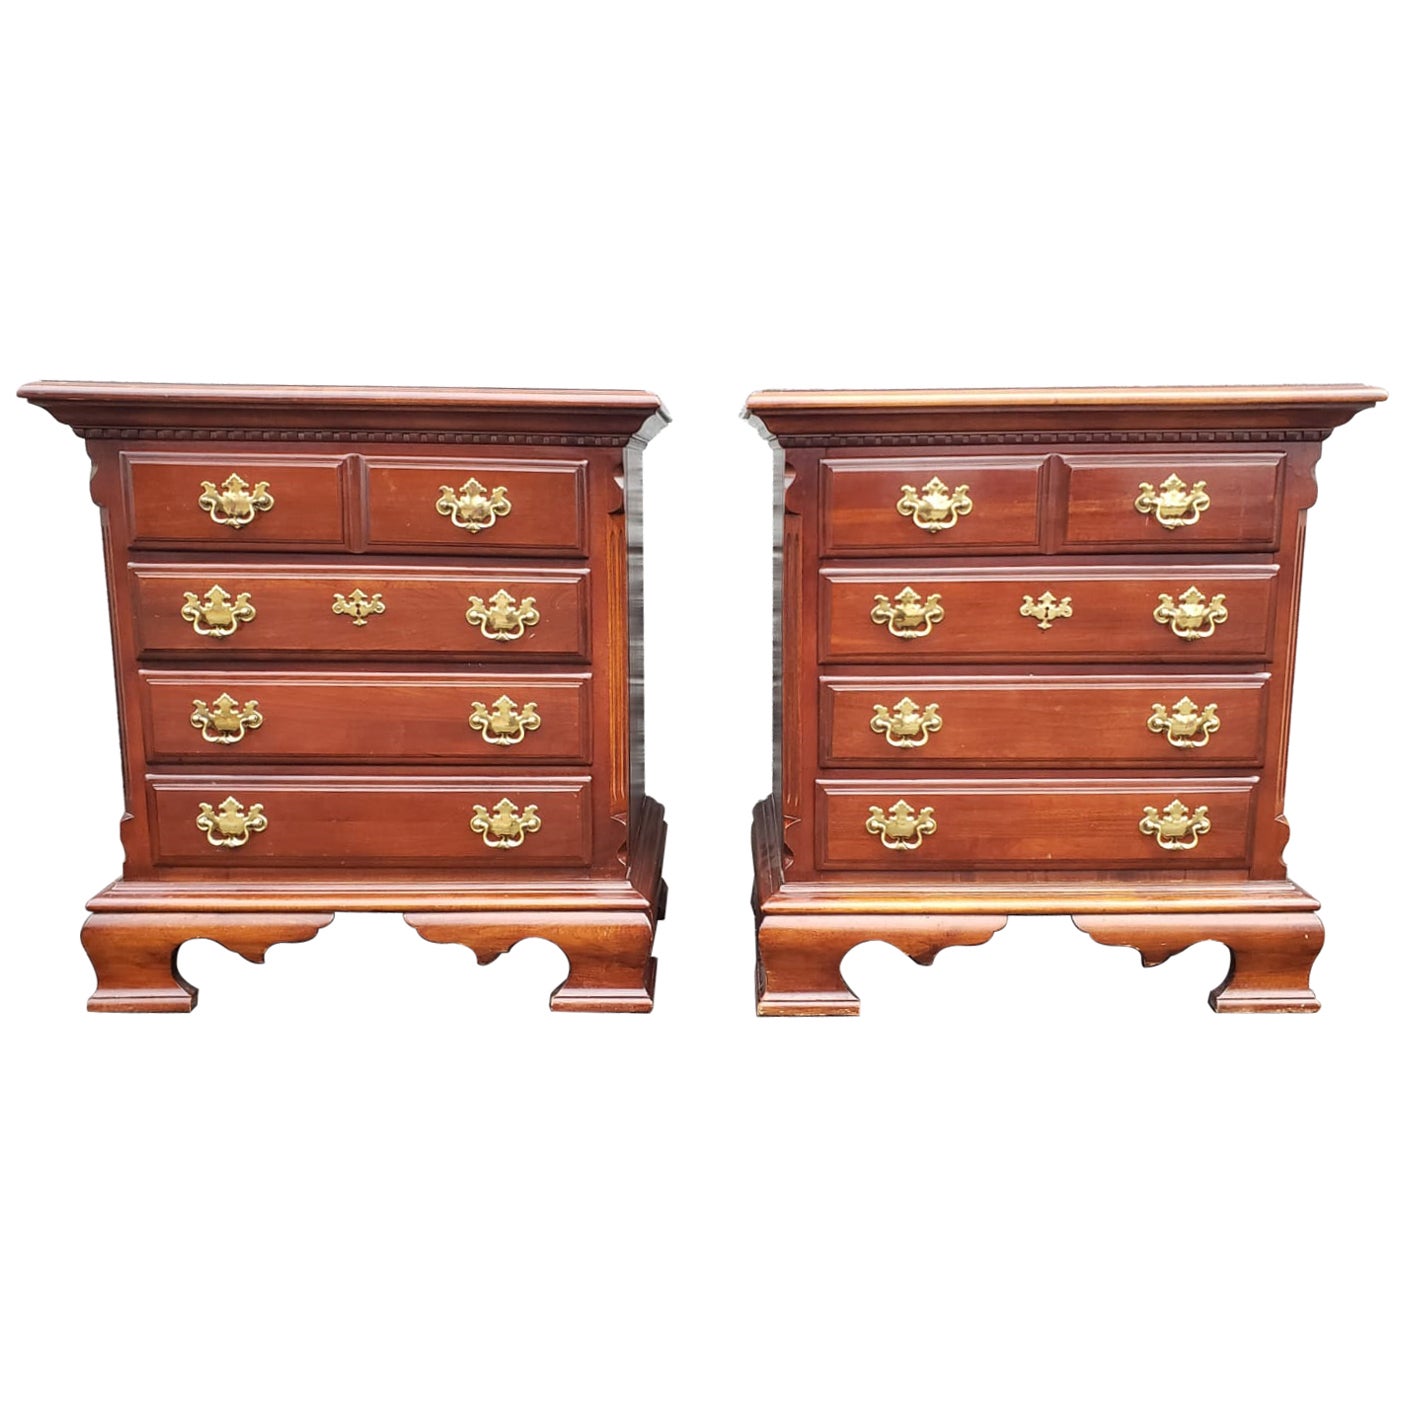 Lexington Furniture Chippendale Bedside Chest of Drawers Nightstands, Pair